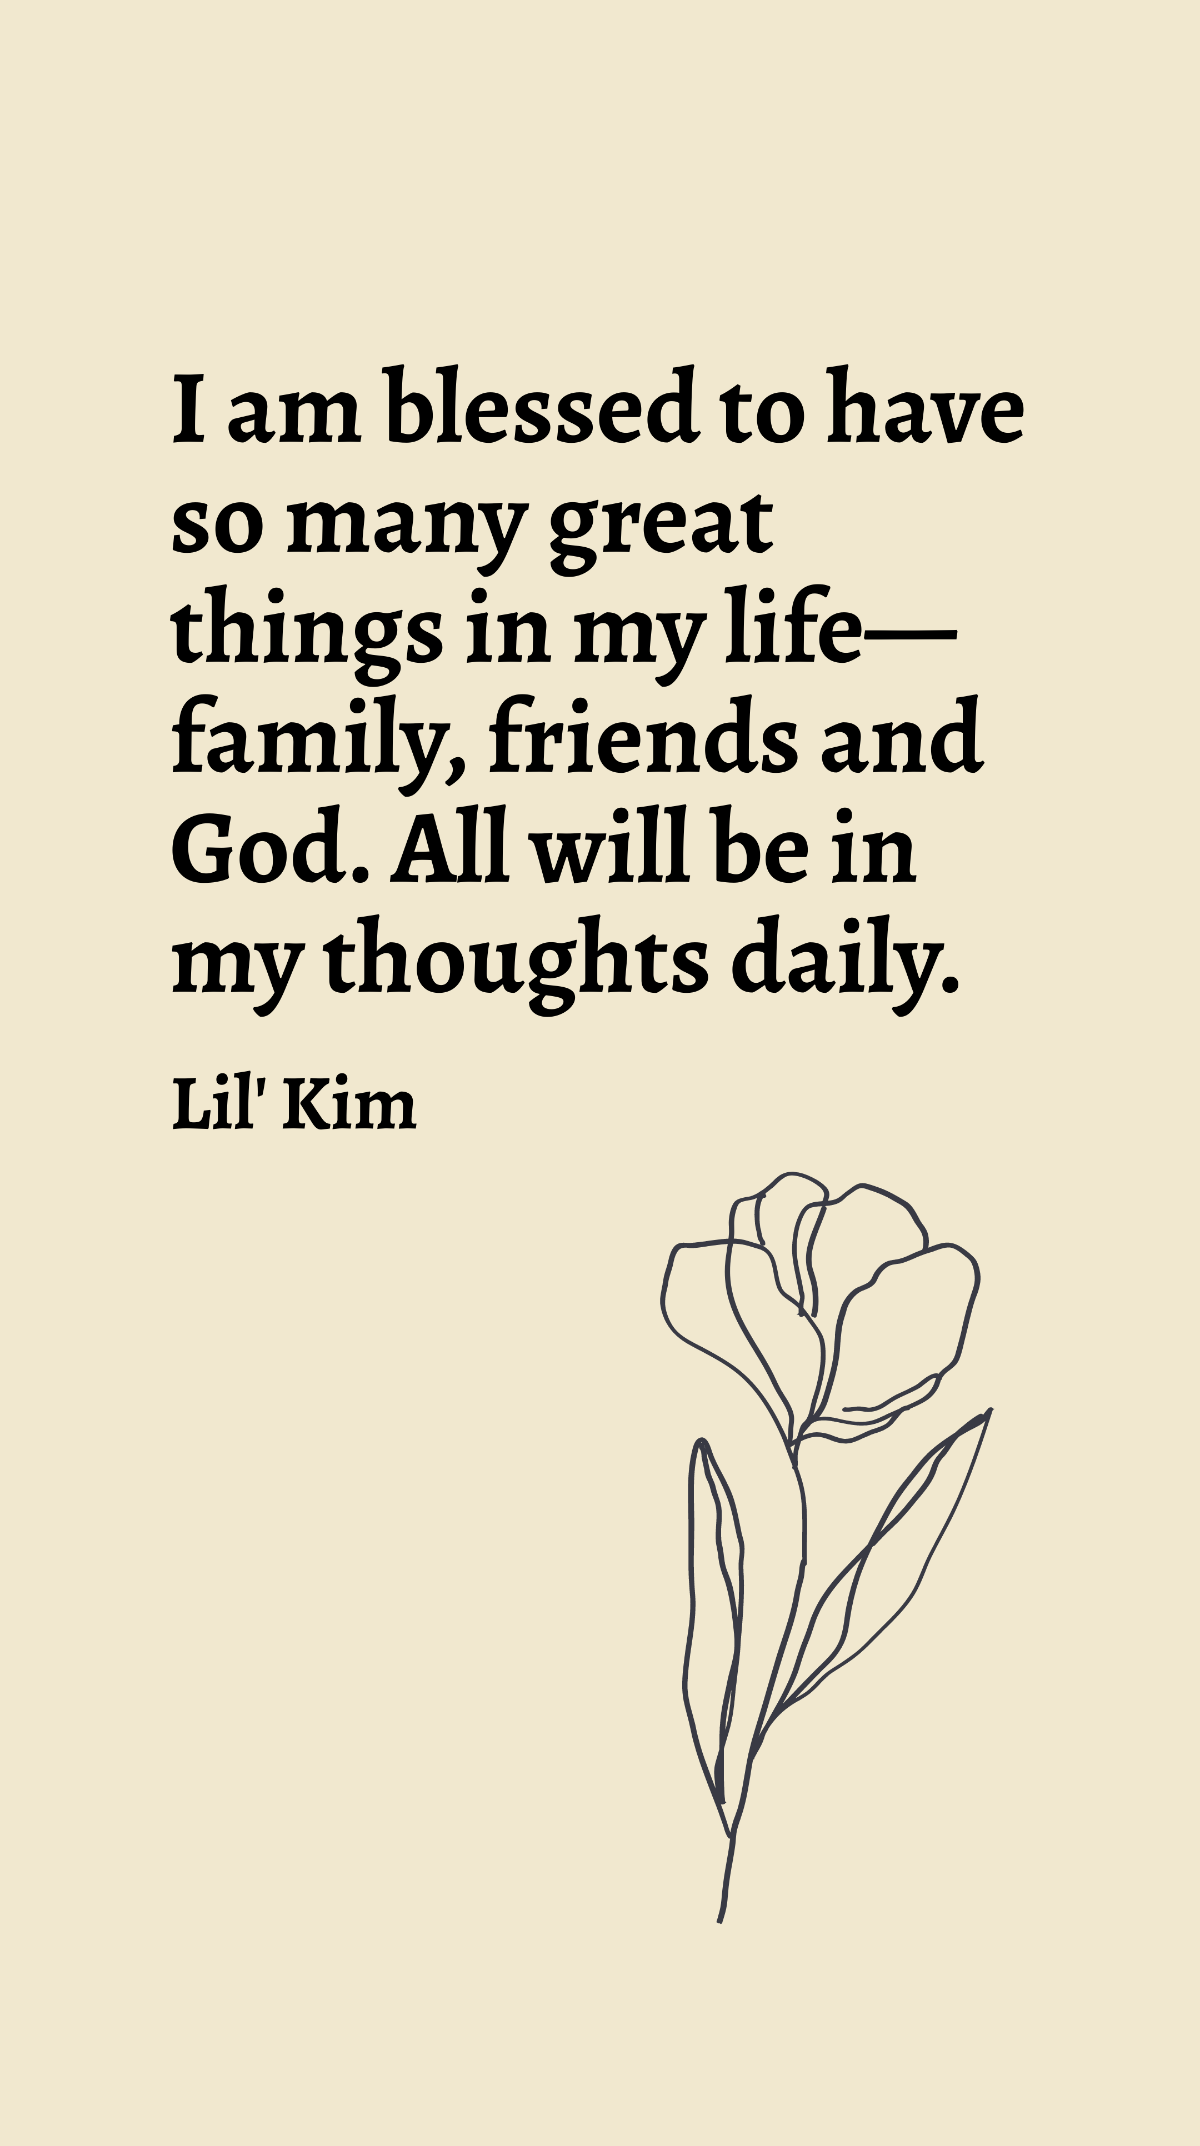 Lil' Kim - I am blessed to have so many great things in my life - family, friends and God. All will be in my thoughts daily. Template